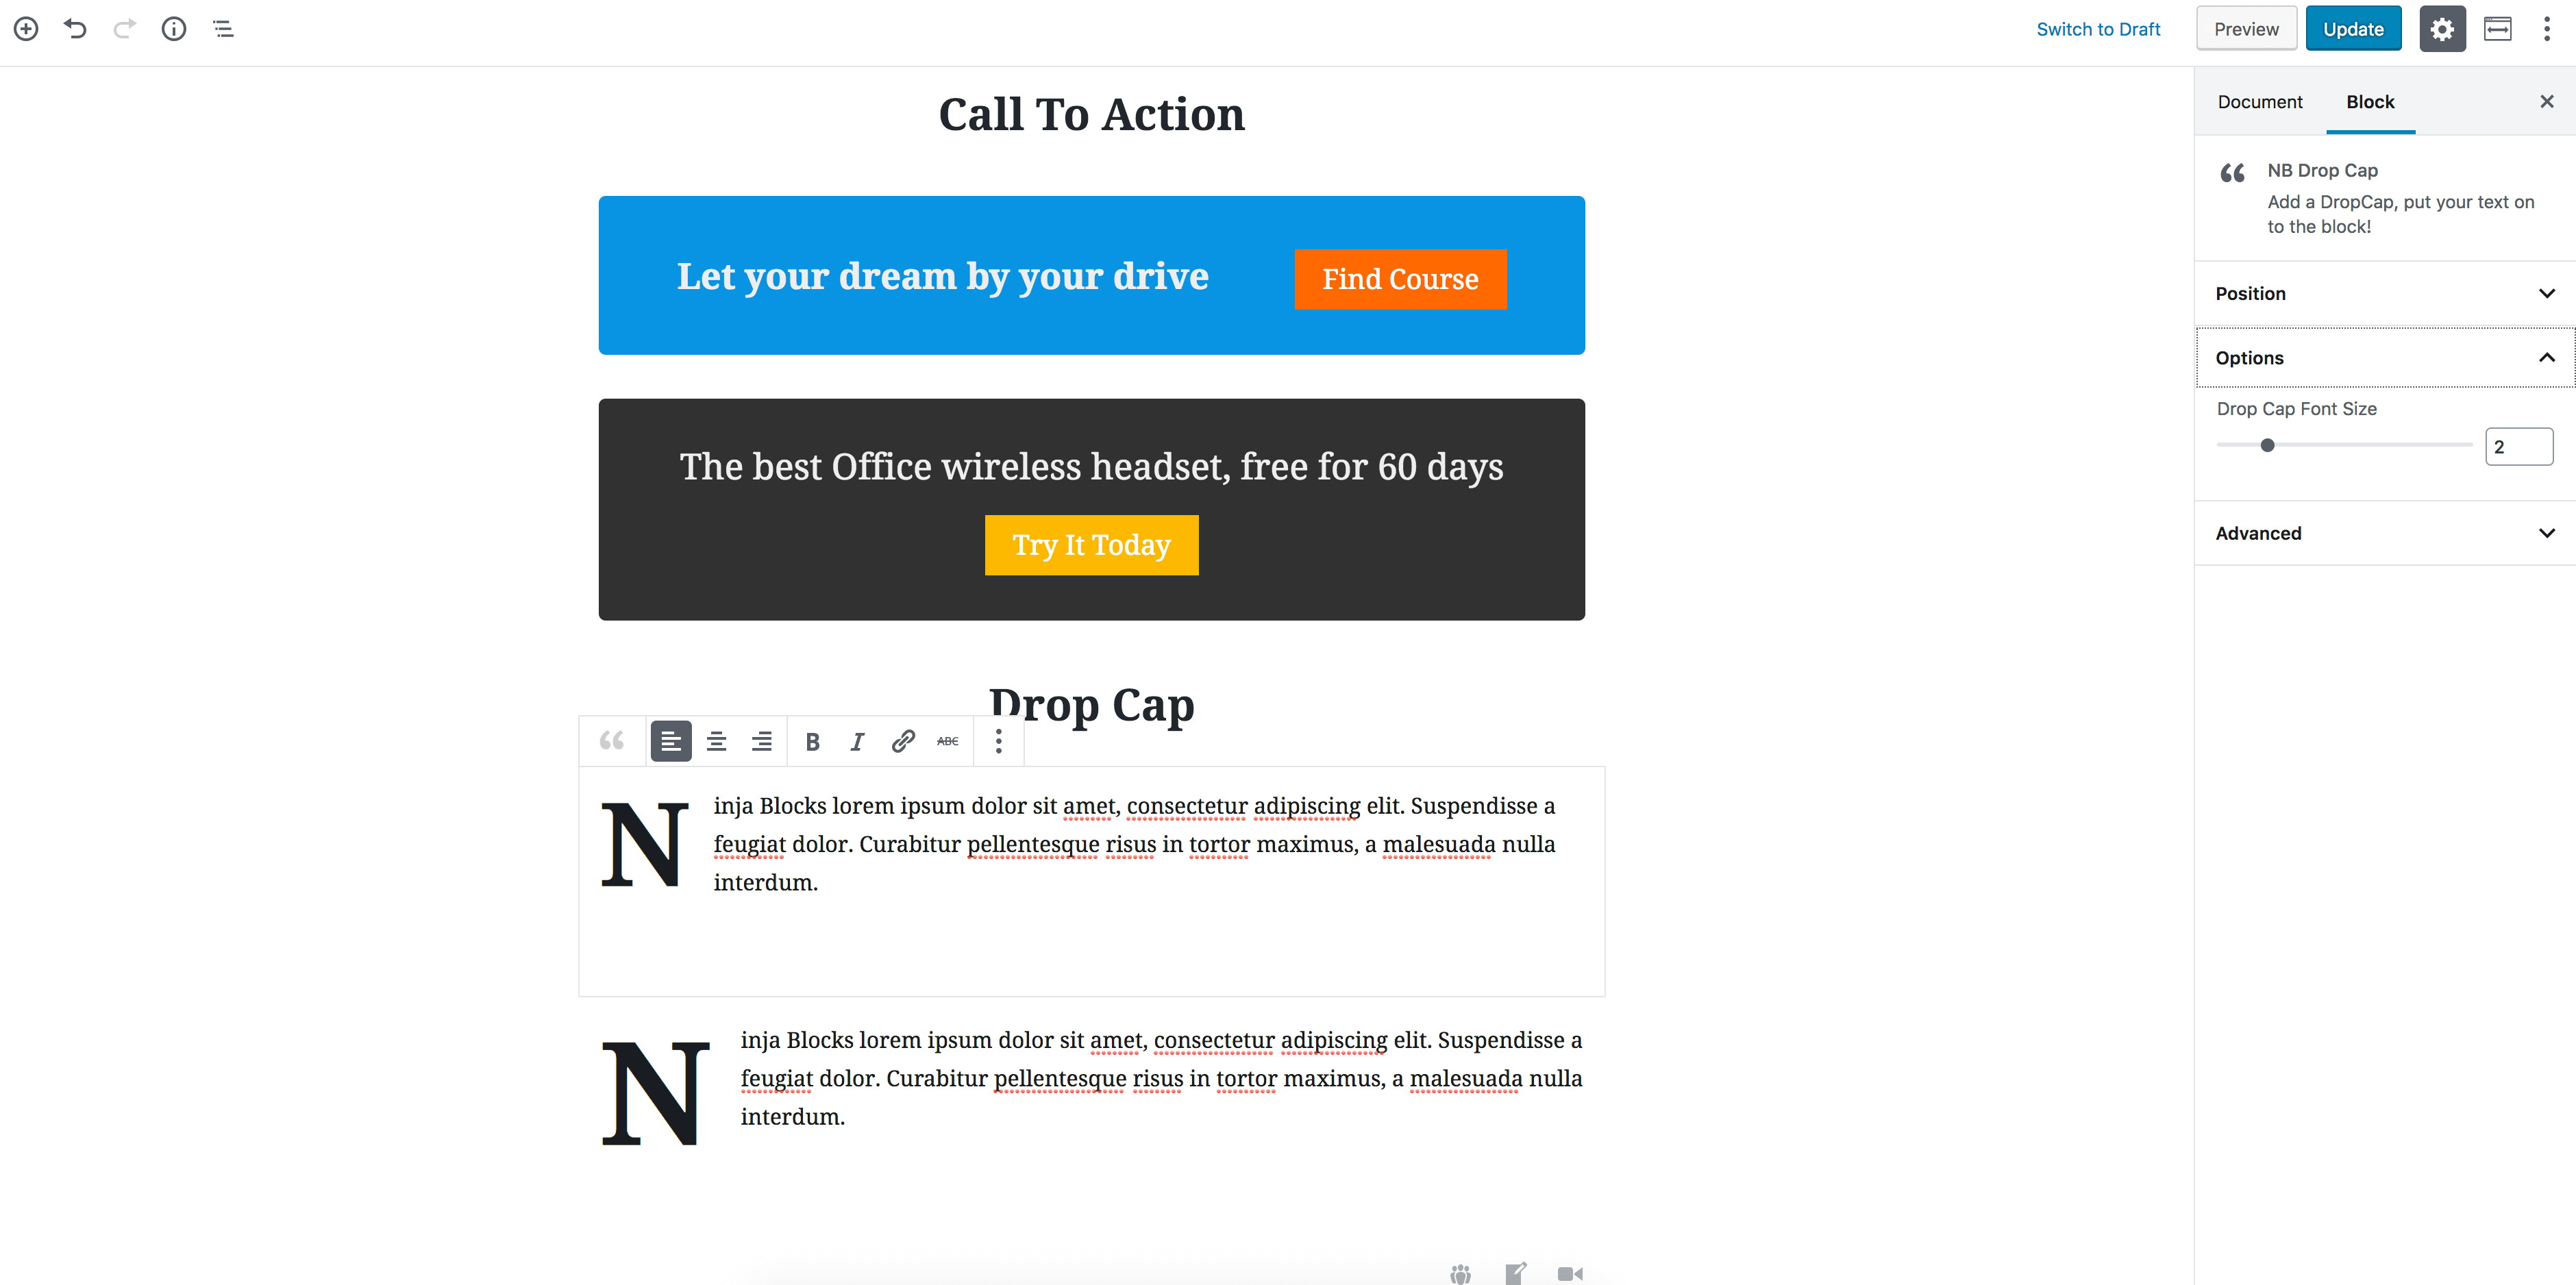 Call To Action and DropCap Block Example